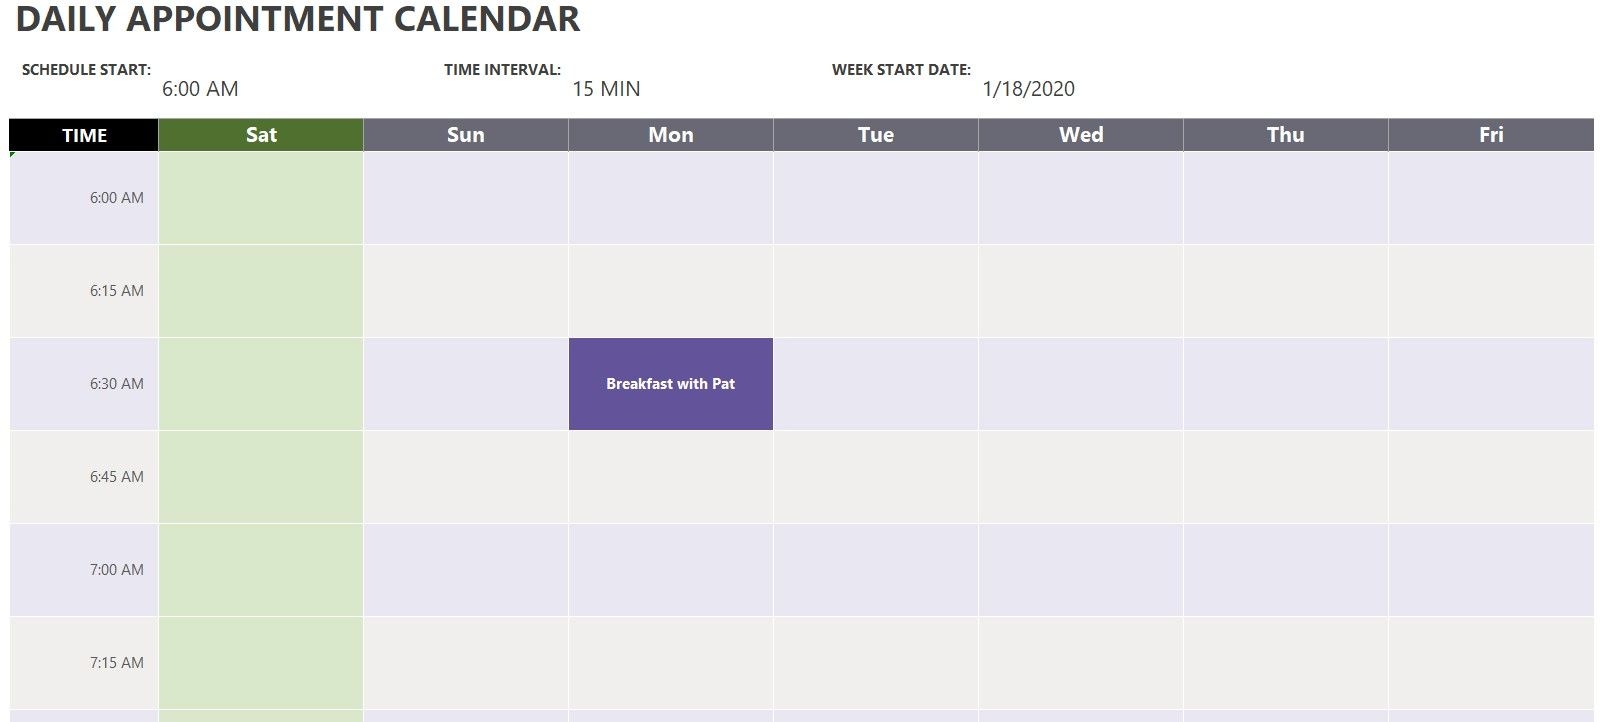 Daily Appointment Calendar Template | Exceltemplate